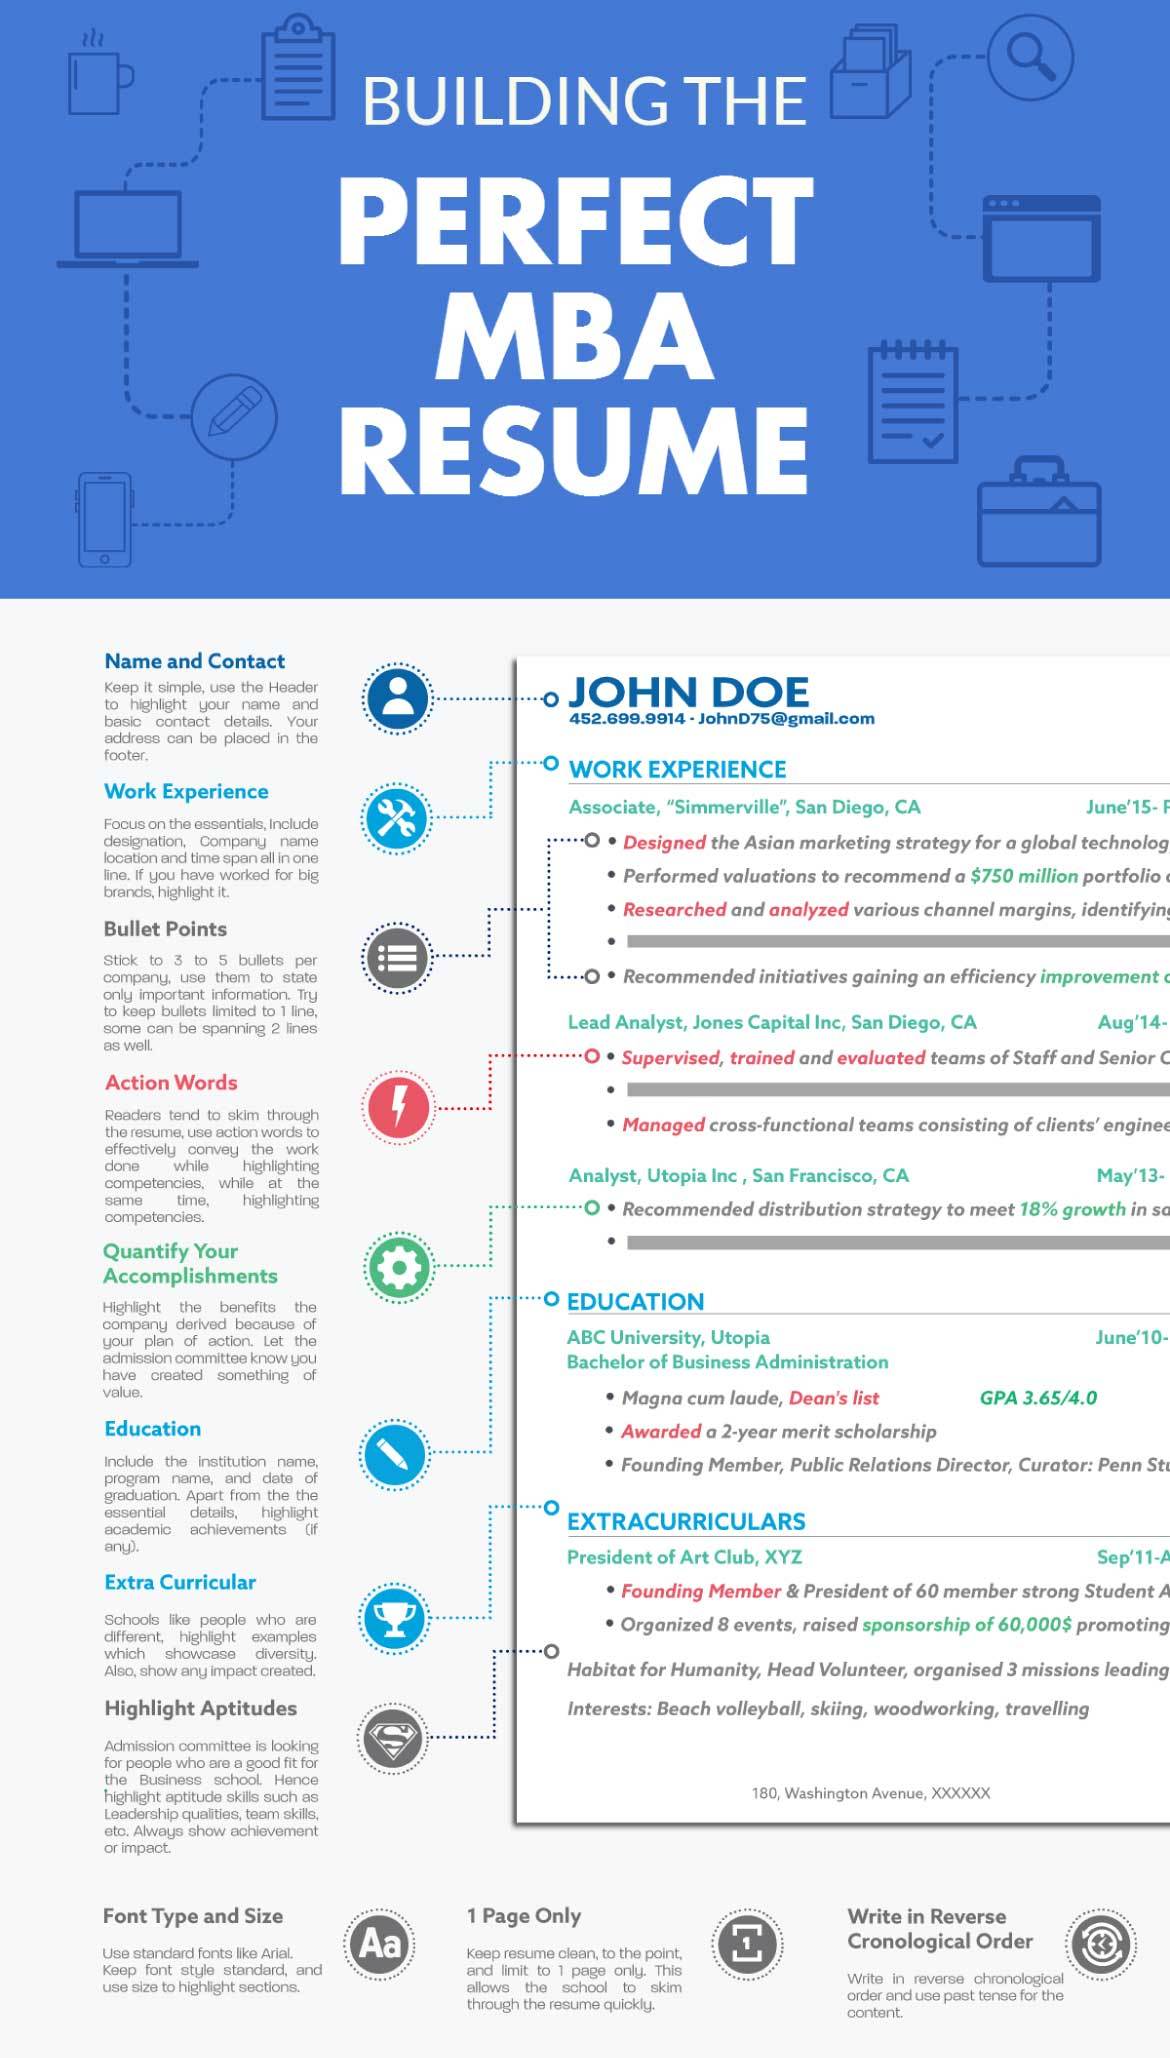 10 Steps Towards Creating the Perfect MBA Resume Infographic